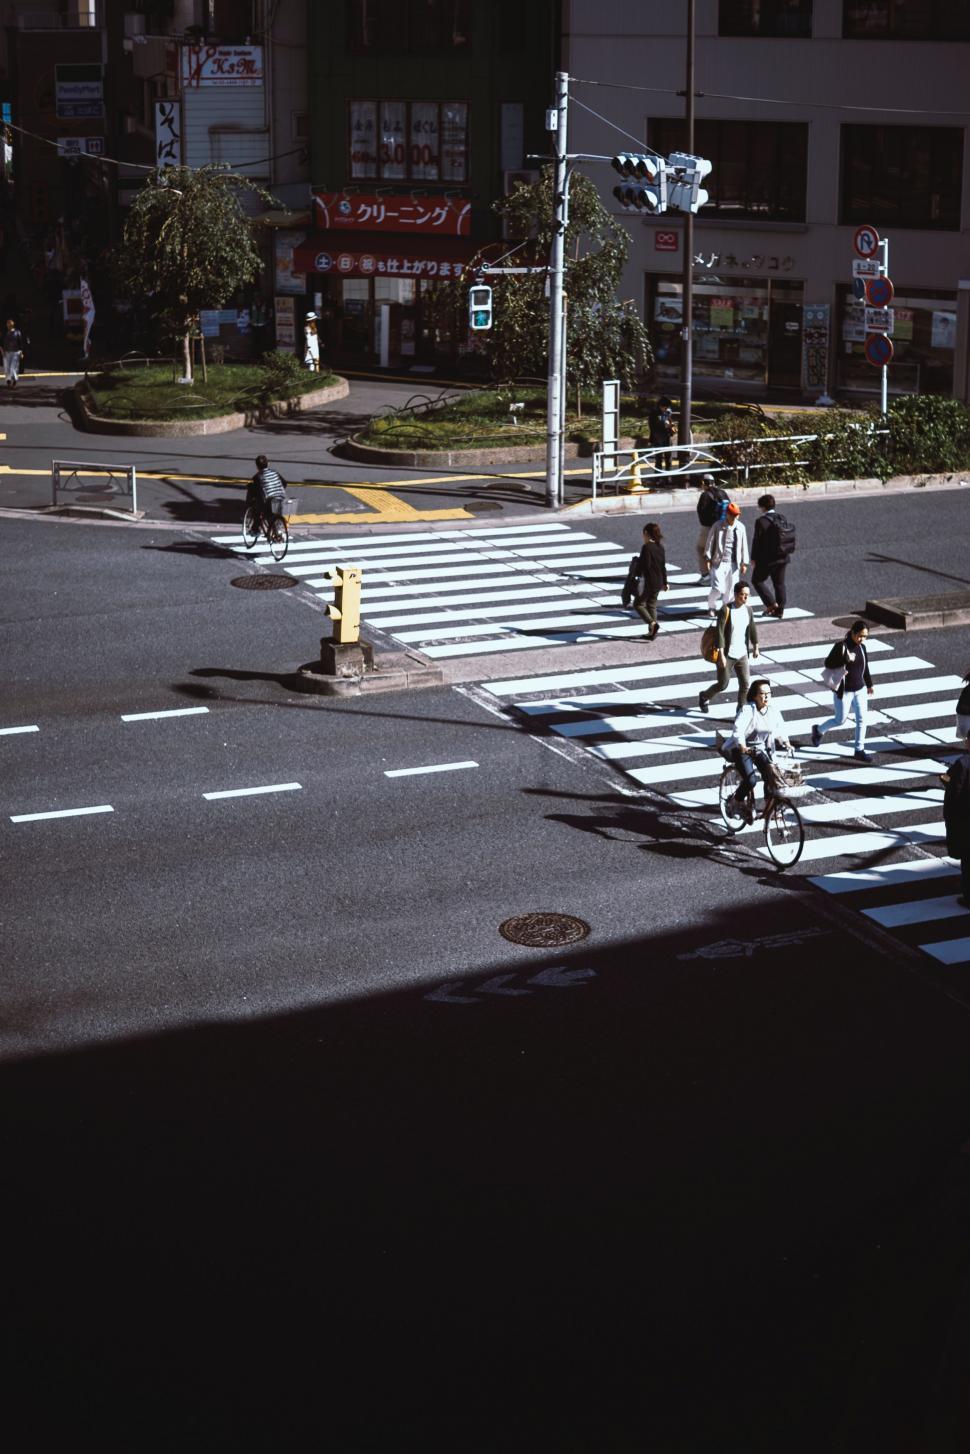 Free Image of Group of People Riding Bikes Across Street 